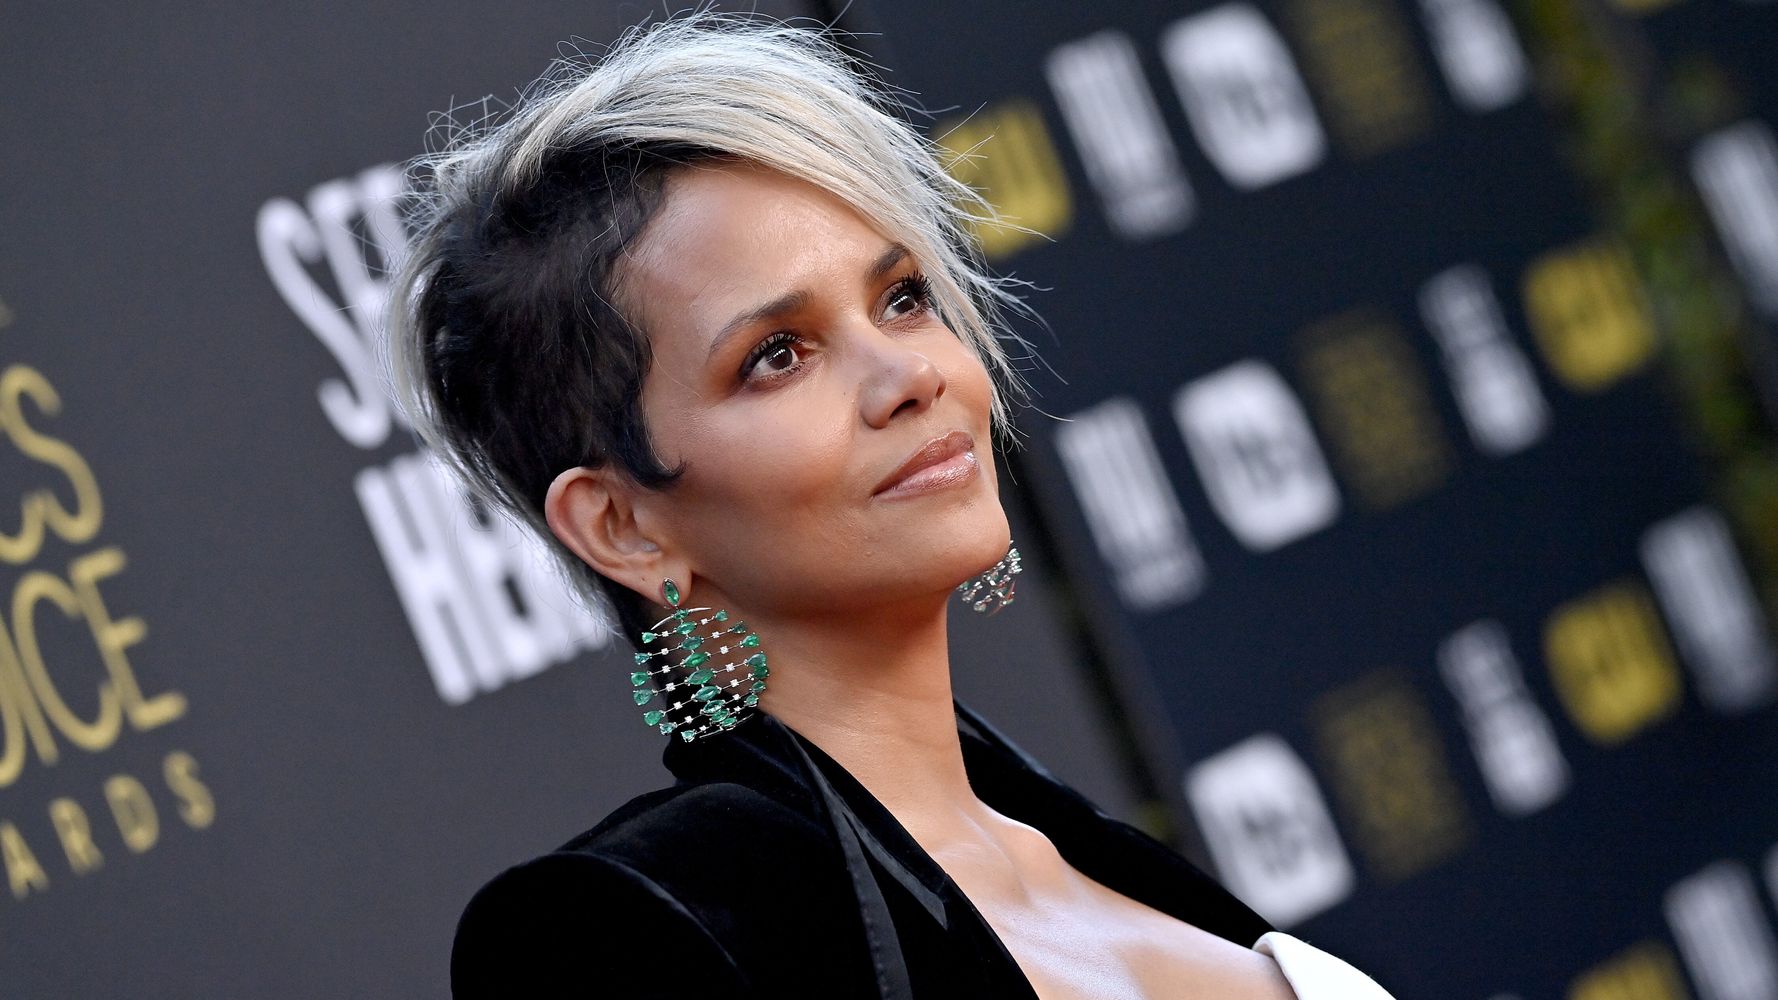 Halle Berry's New Hairdo And Tweet Spark A Storm Of Speculation | HuffPost  Entertainment